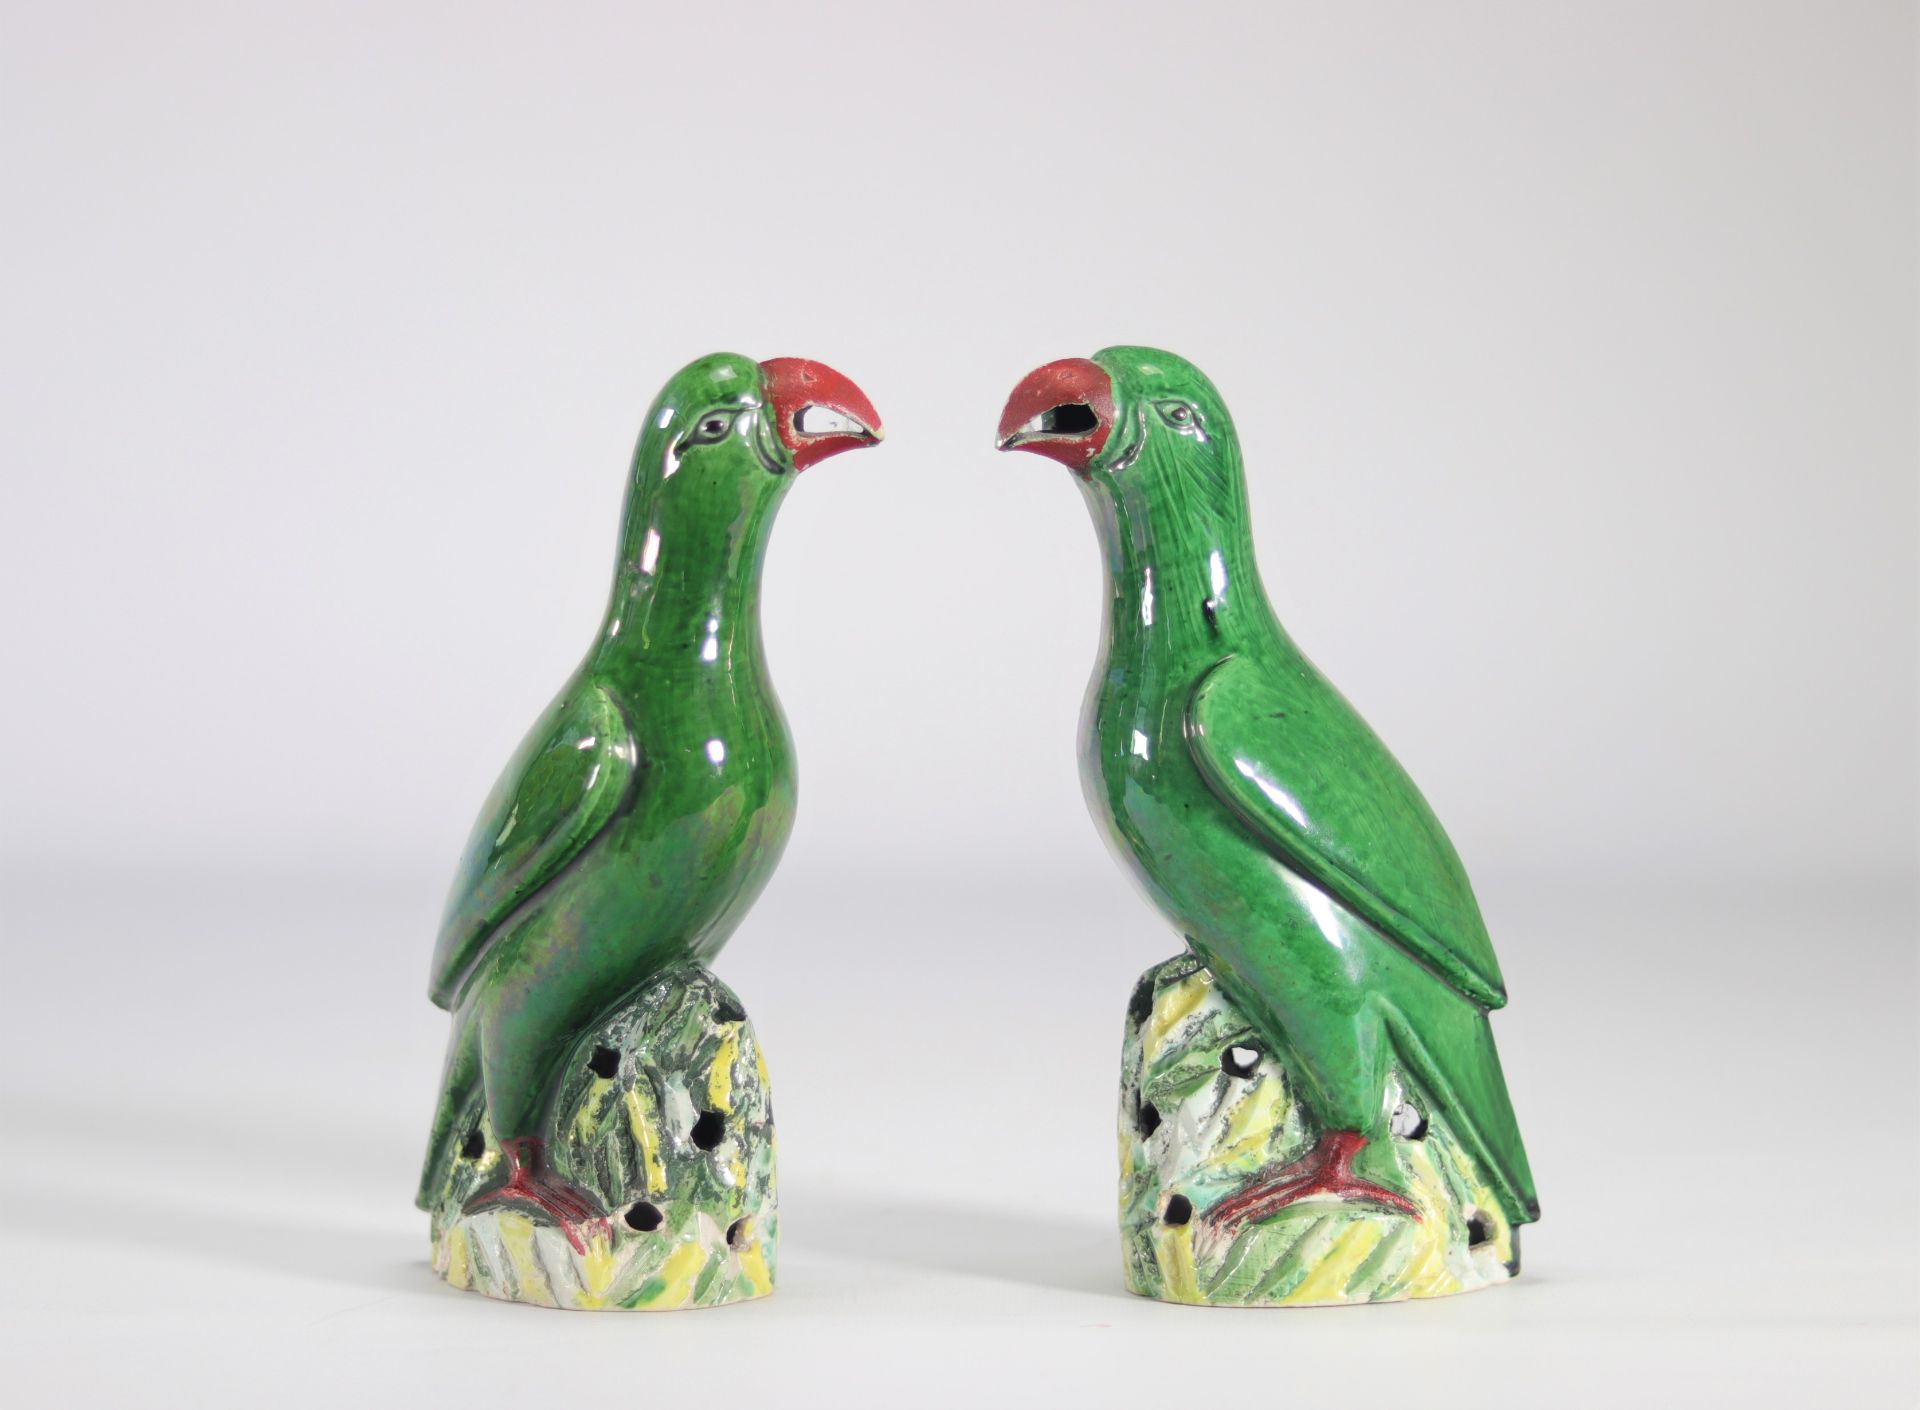 Pair of green glazed 'parrot' birds from China from the 19th century